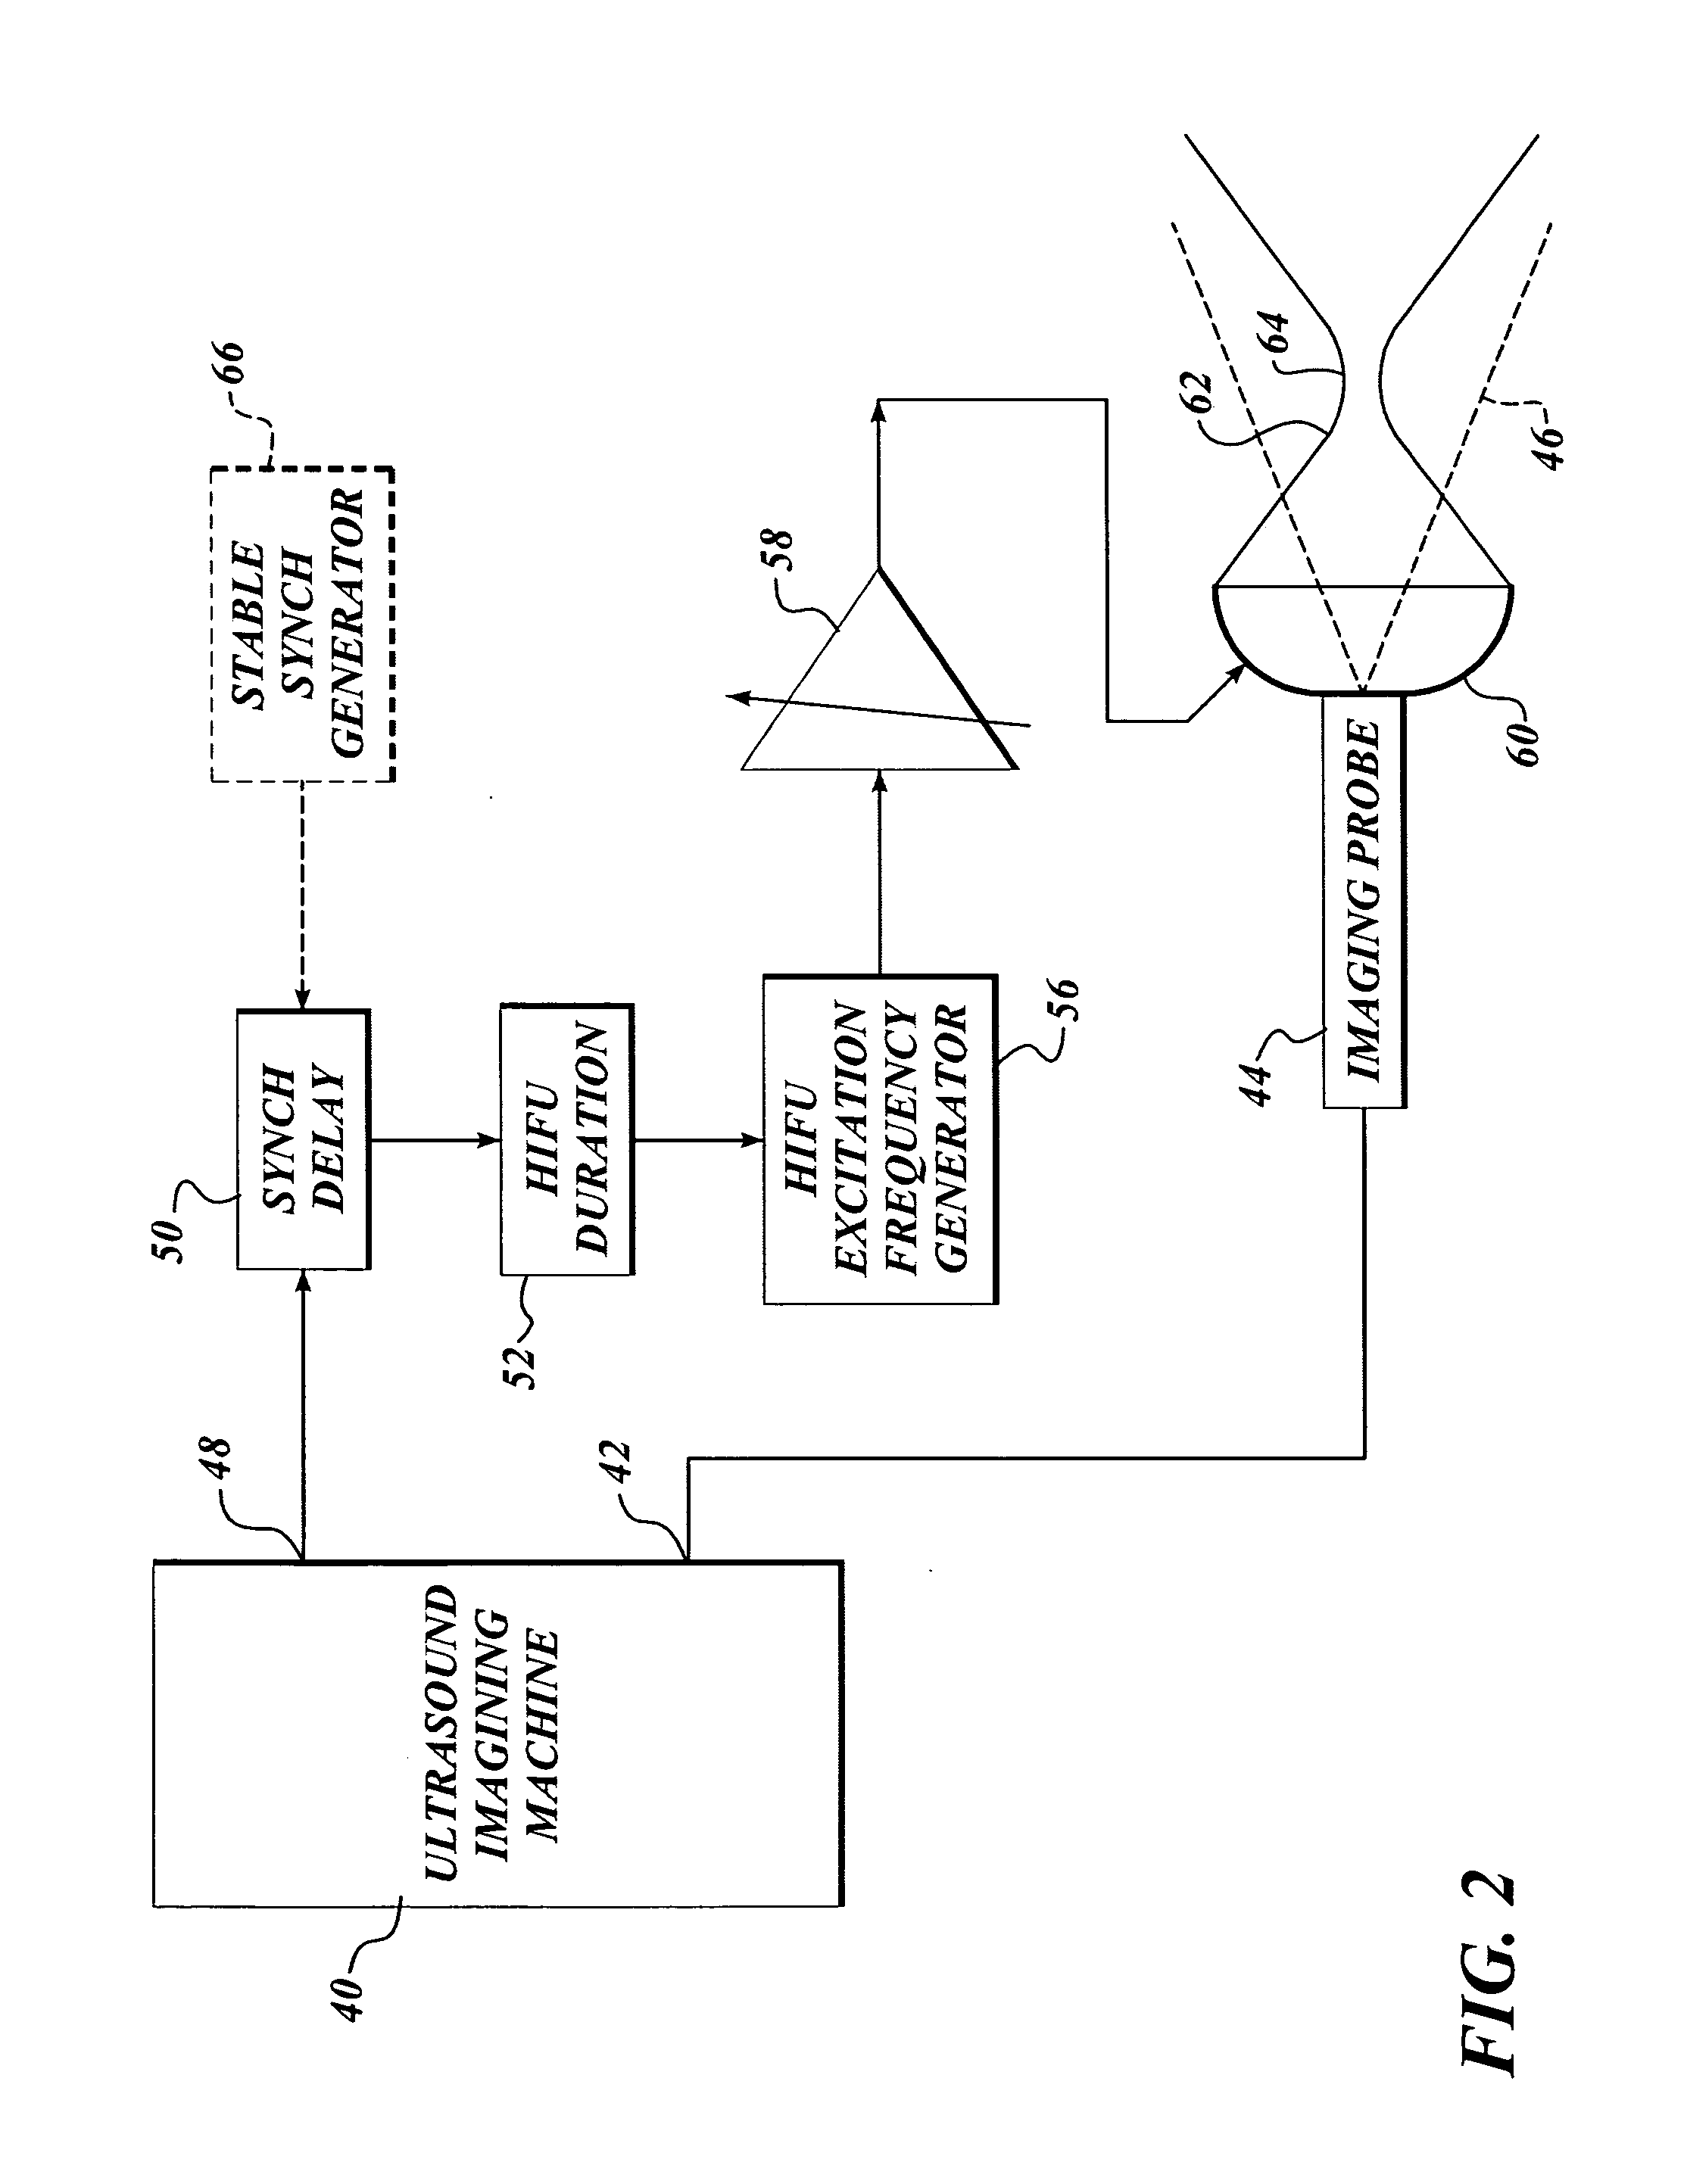 Ultrasound guided high intensity focused ultrasound treatment of nerves